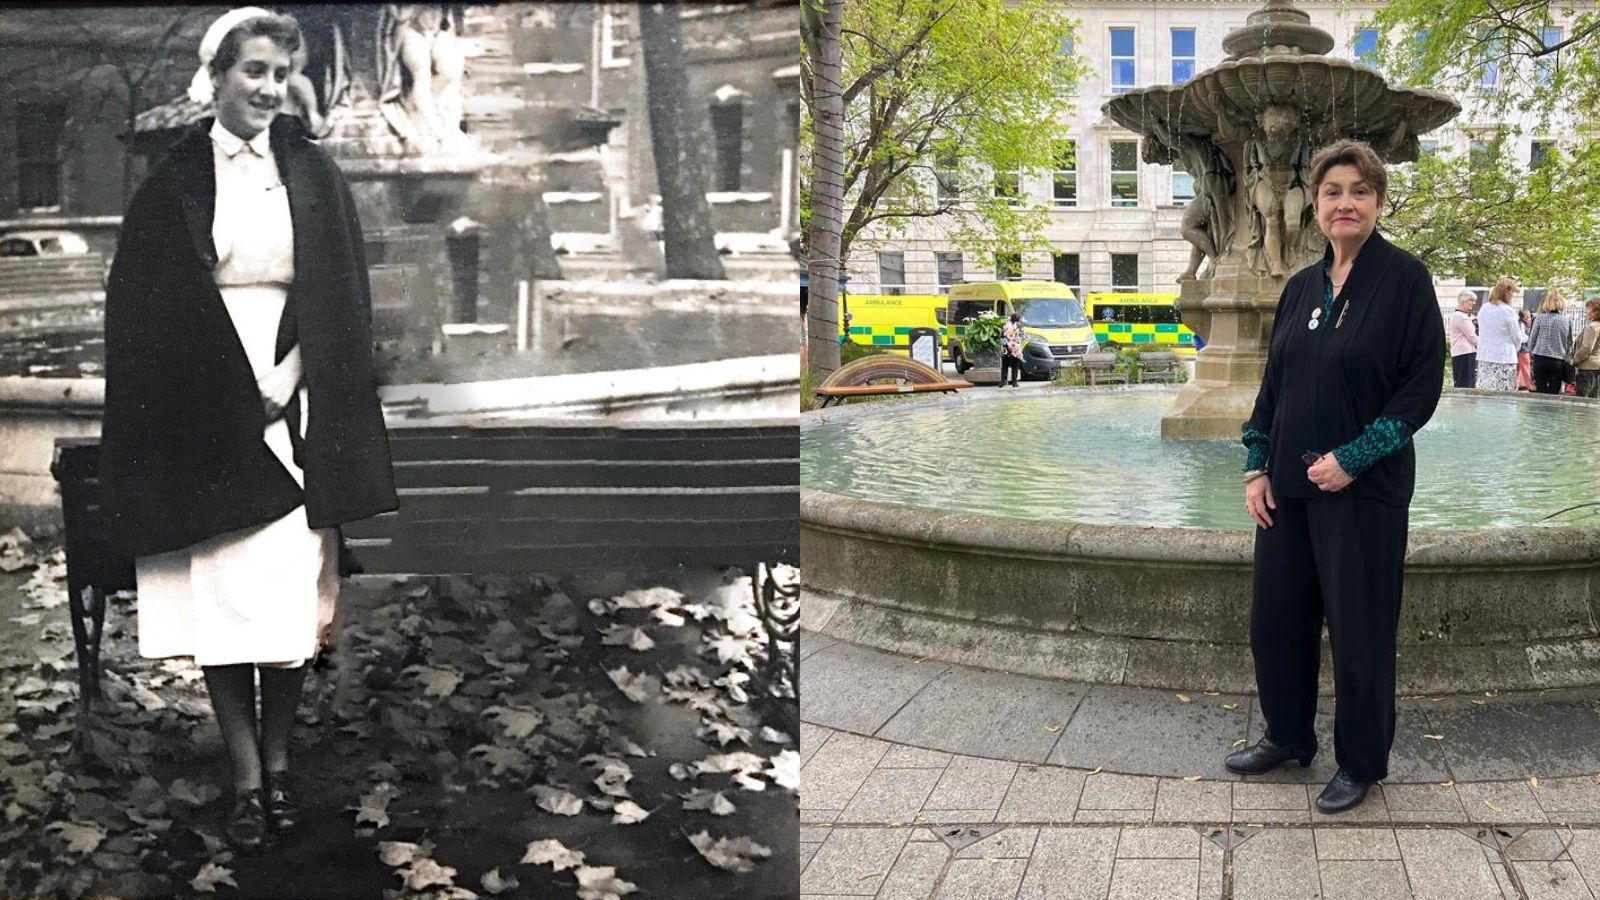 Nurse in the square at Barts circa 1980s and same nurse stood in the spot in present day